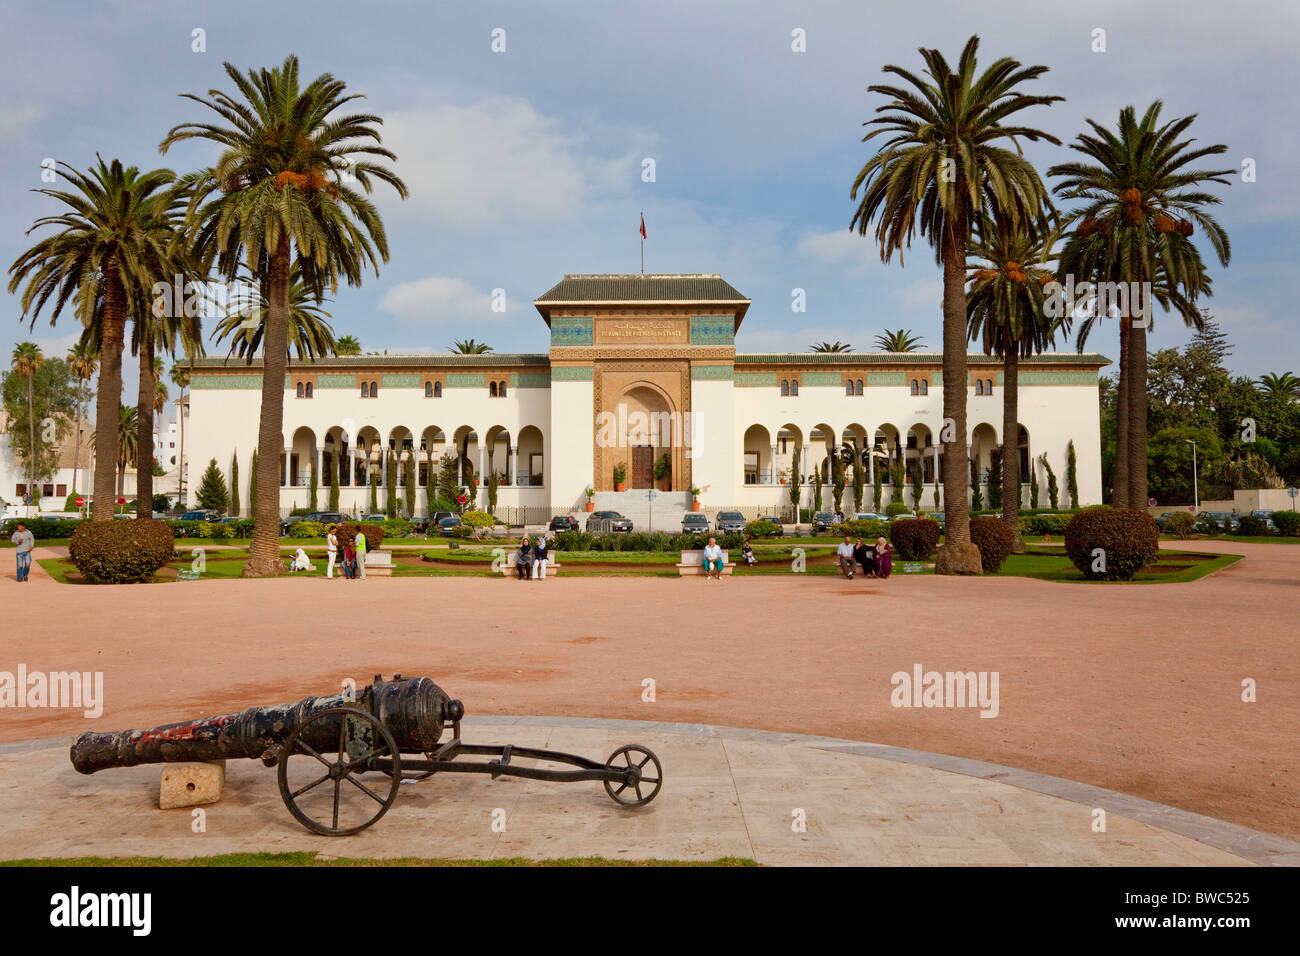 The Mohammed V Square and Palace of Justice in Casablanca, Morocco. Stock Photo